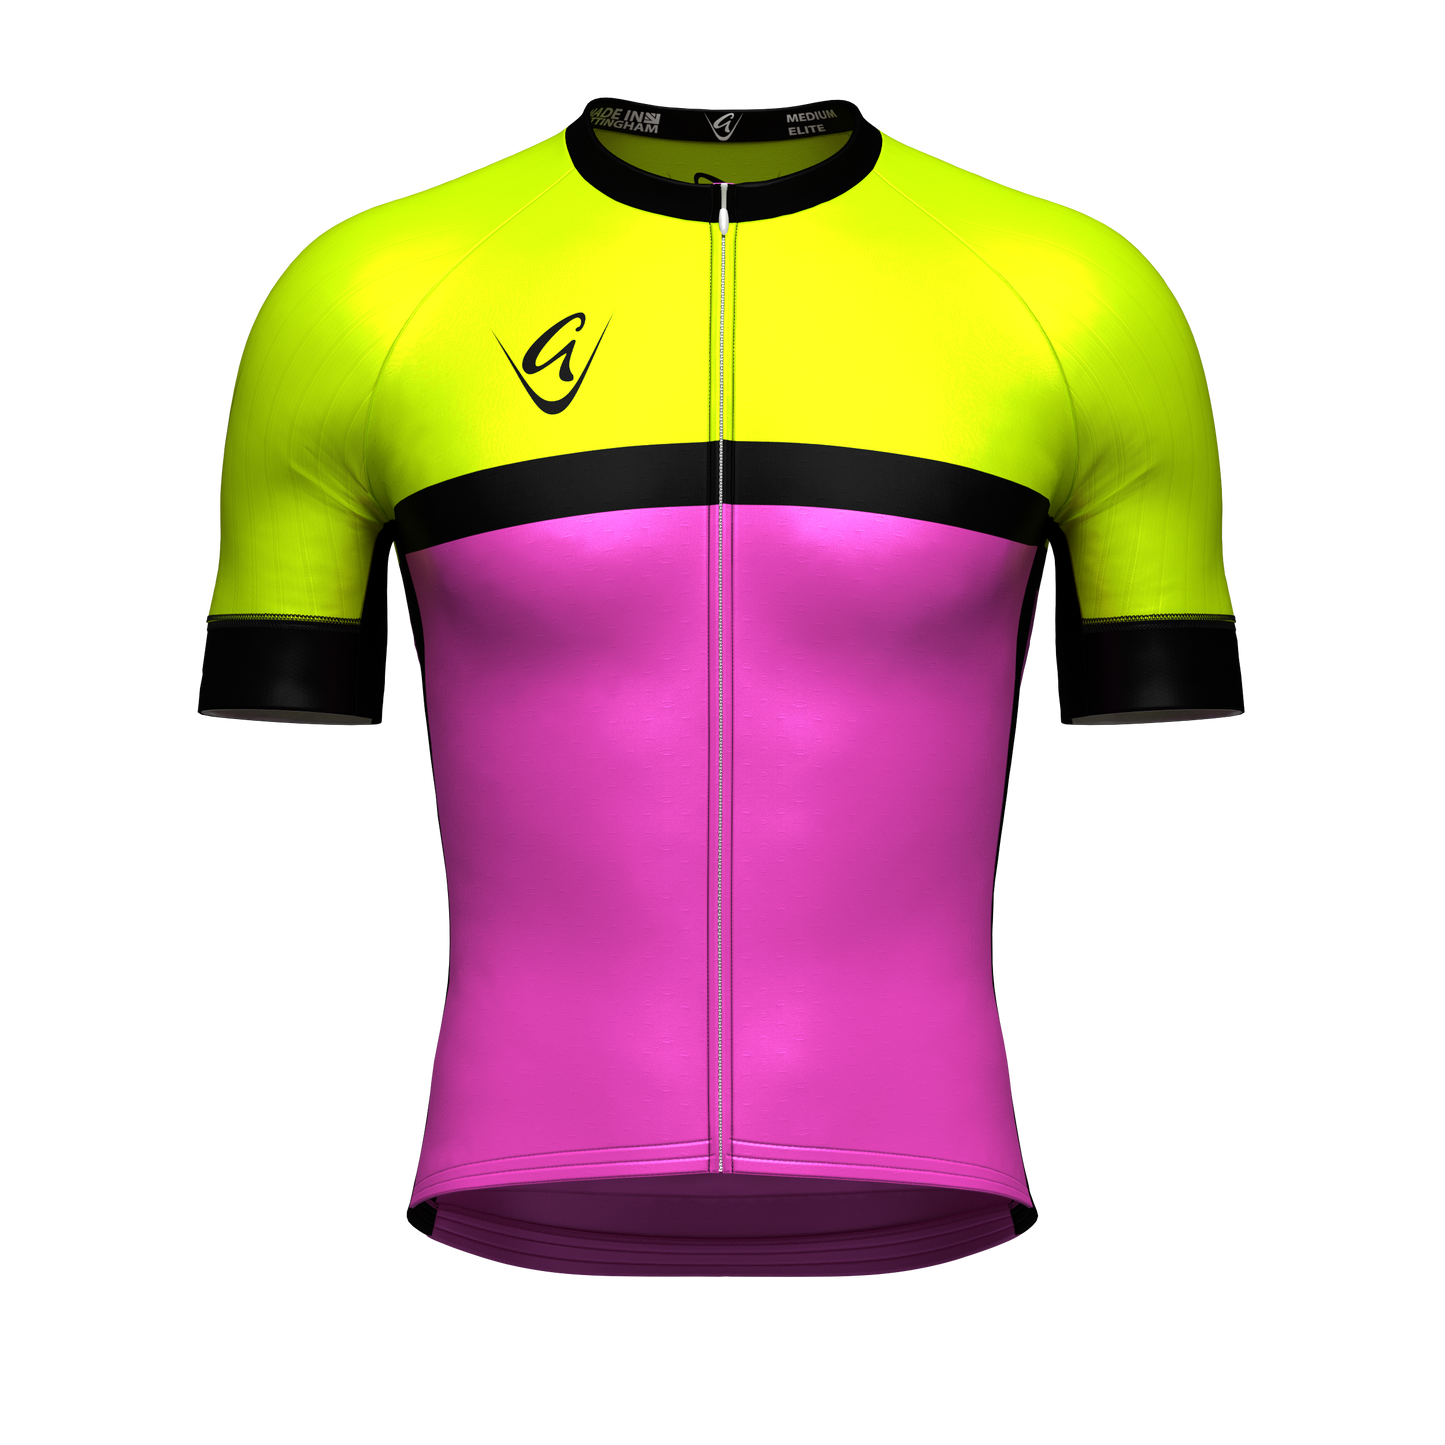 Now You See Me Lightweight Short Sleeve Cycling Jersey